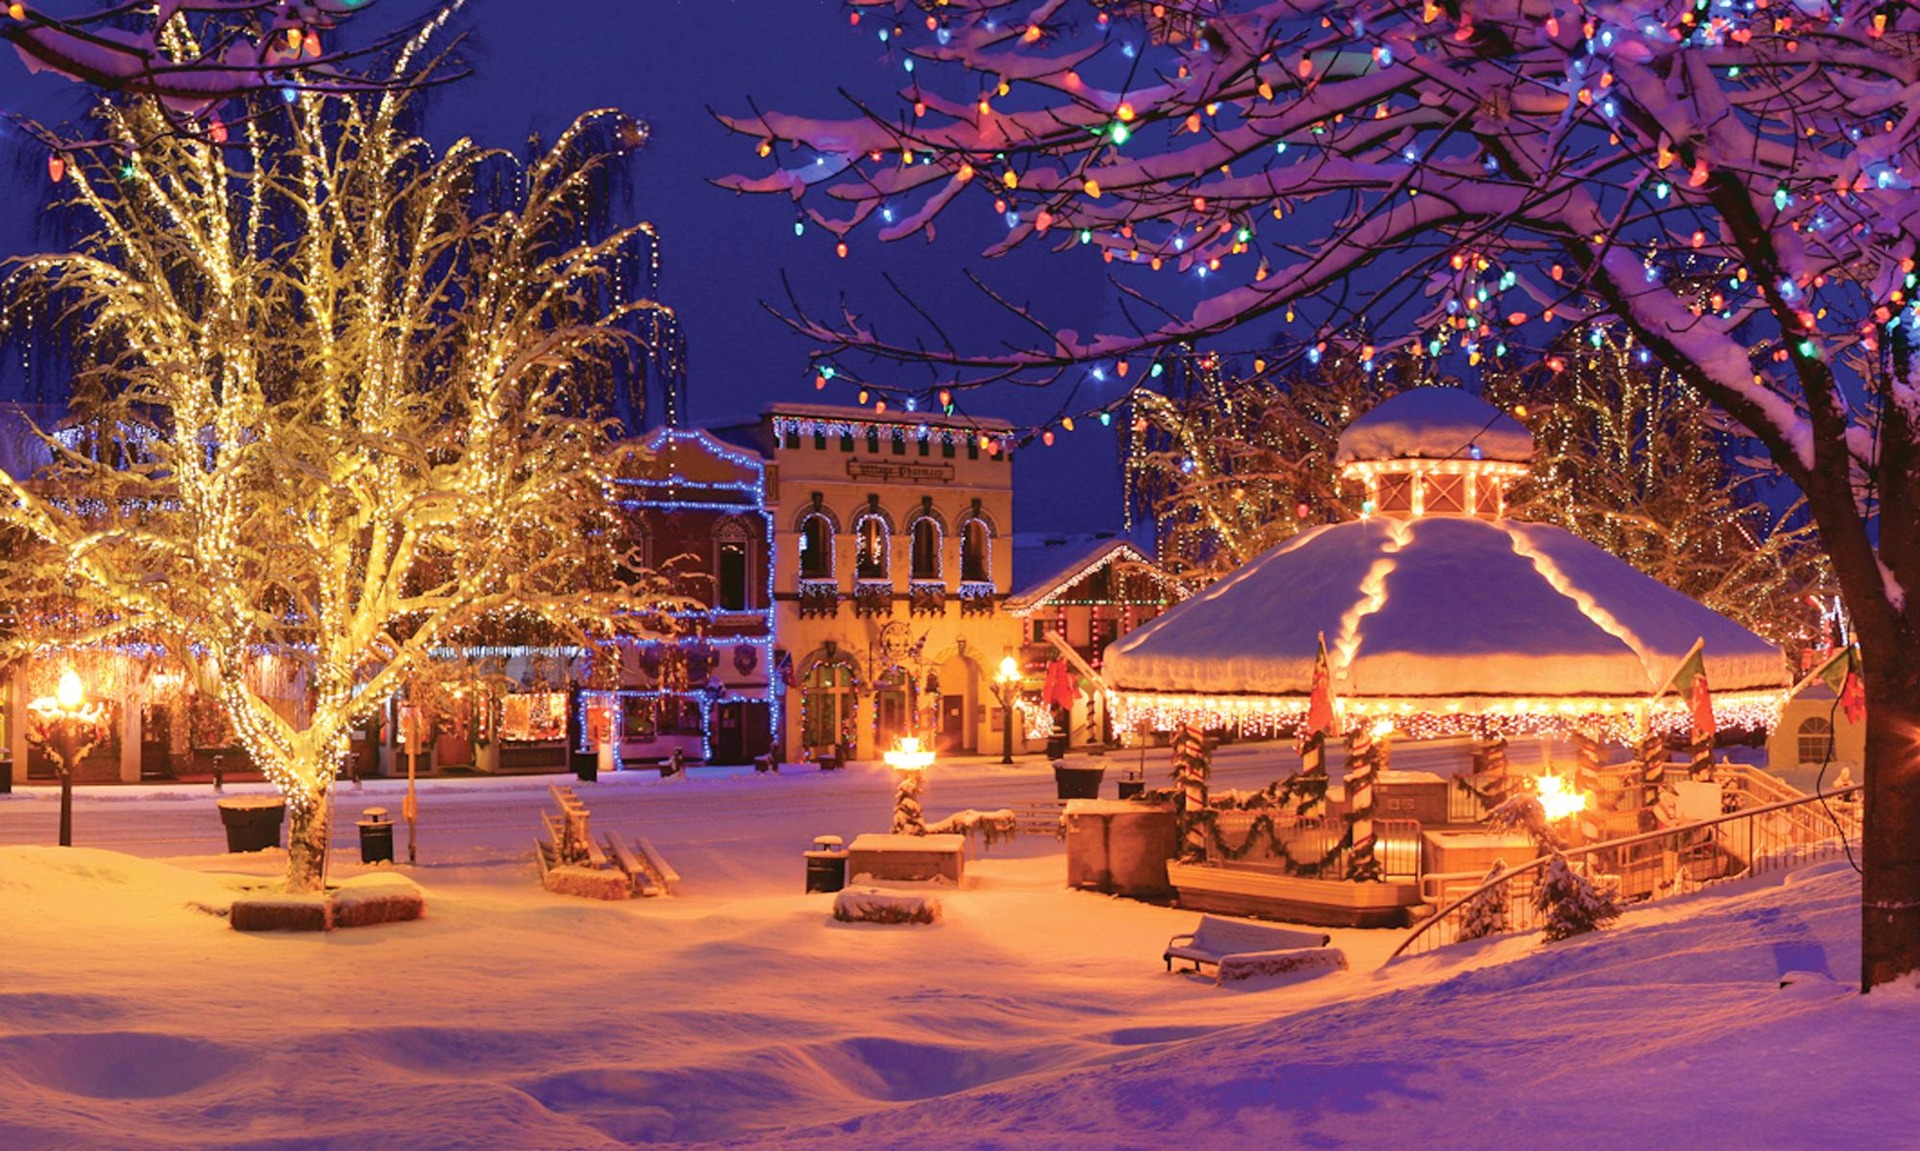 The Most Enchanting Christmas Dream Holiday Towns in America